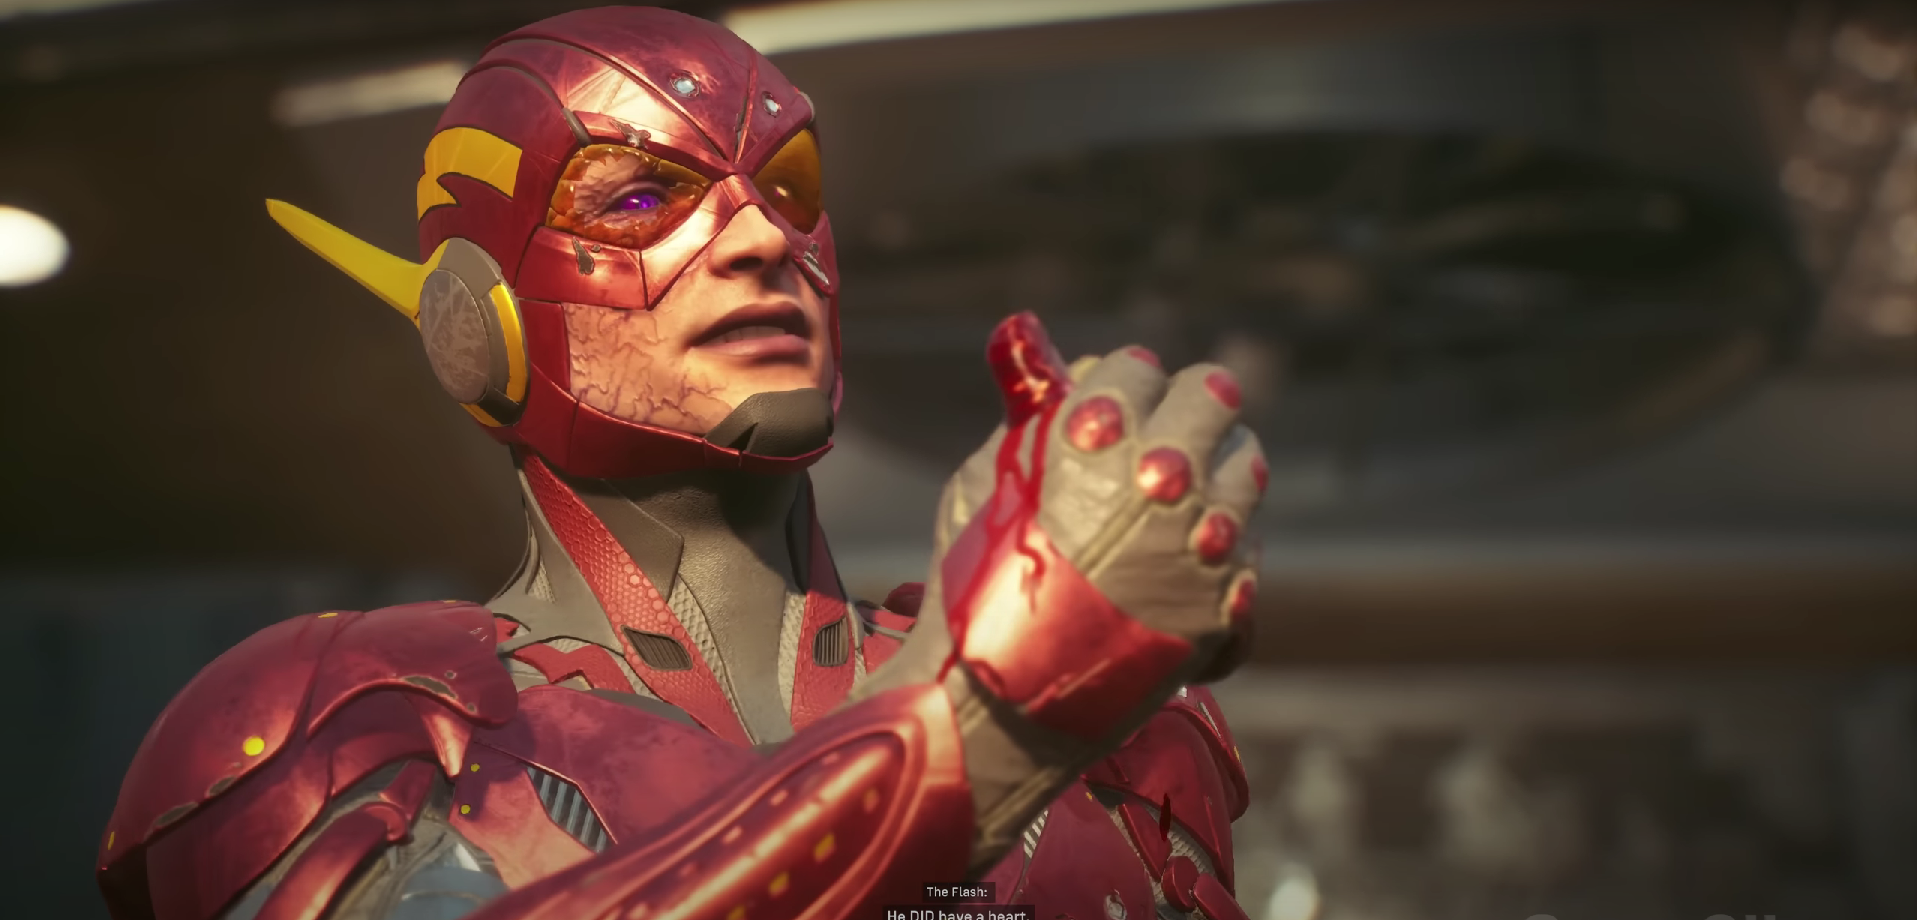 An in game screenshot of The Flash holding Lex Luthor's heart from Suicide Squad Kill the Justice League